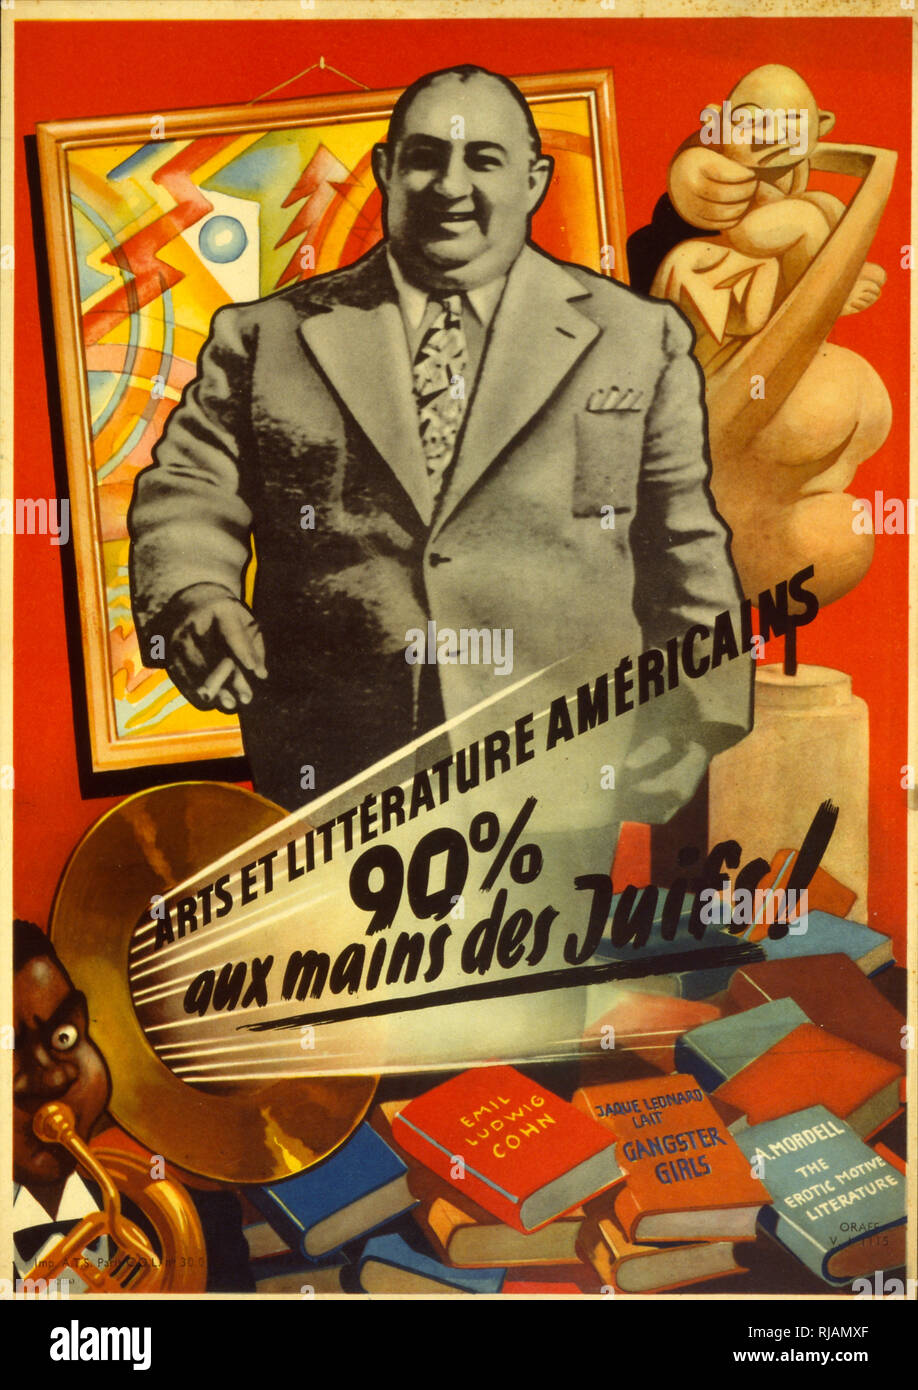 World War Two Nazi propaganda poster for occupied France. Declaring that 90% of the American press is controlled by Jews Stock Photo